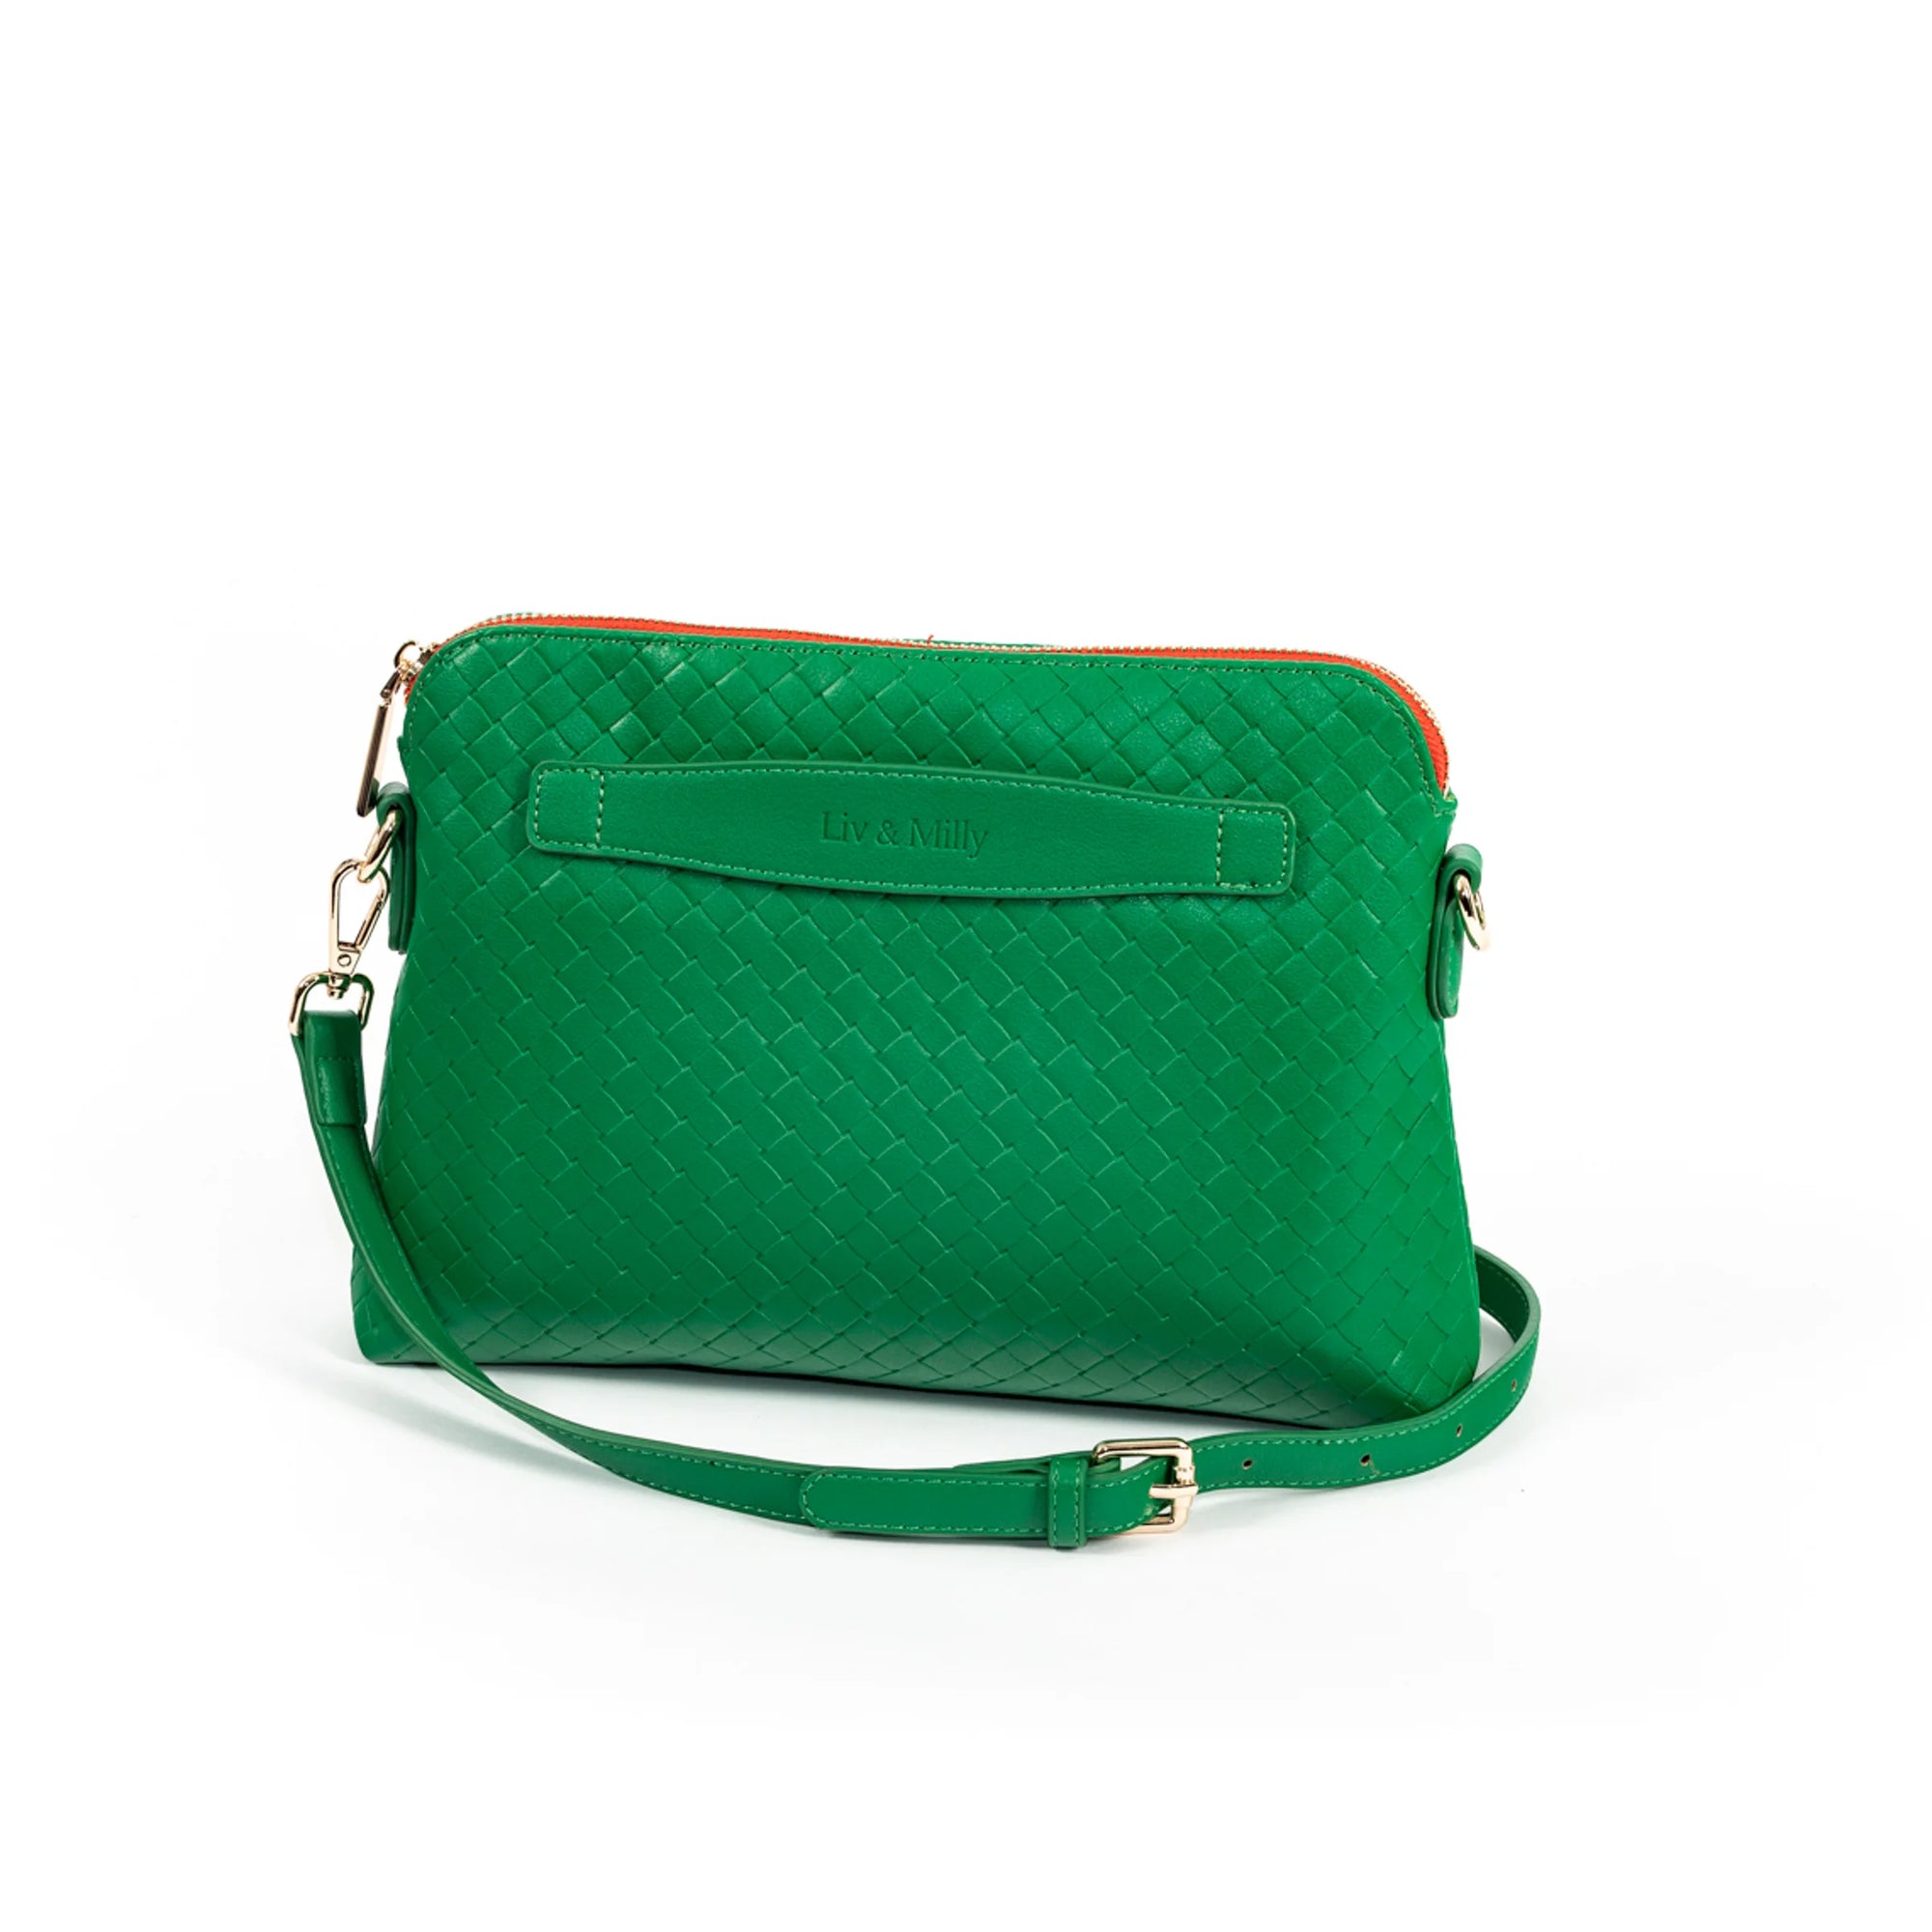 Mill & Hide - Liv & Milly - Lucille Crossbody Bag - Green